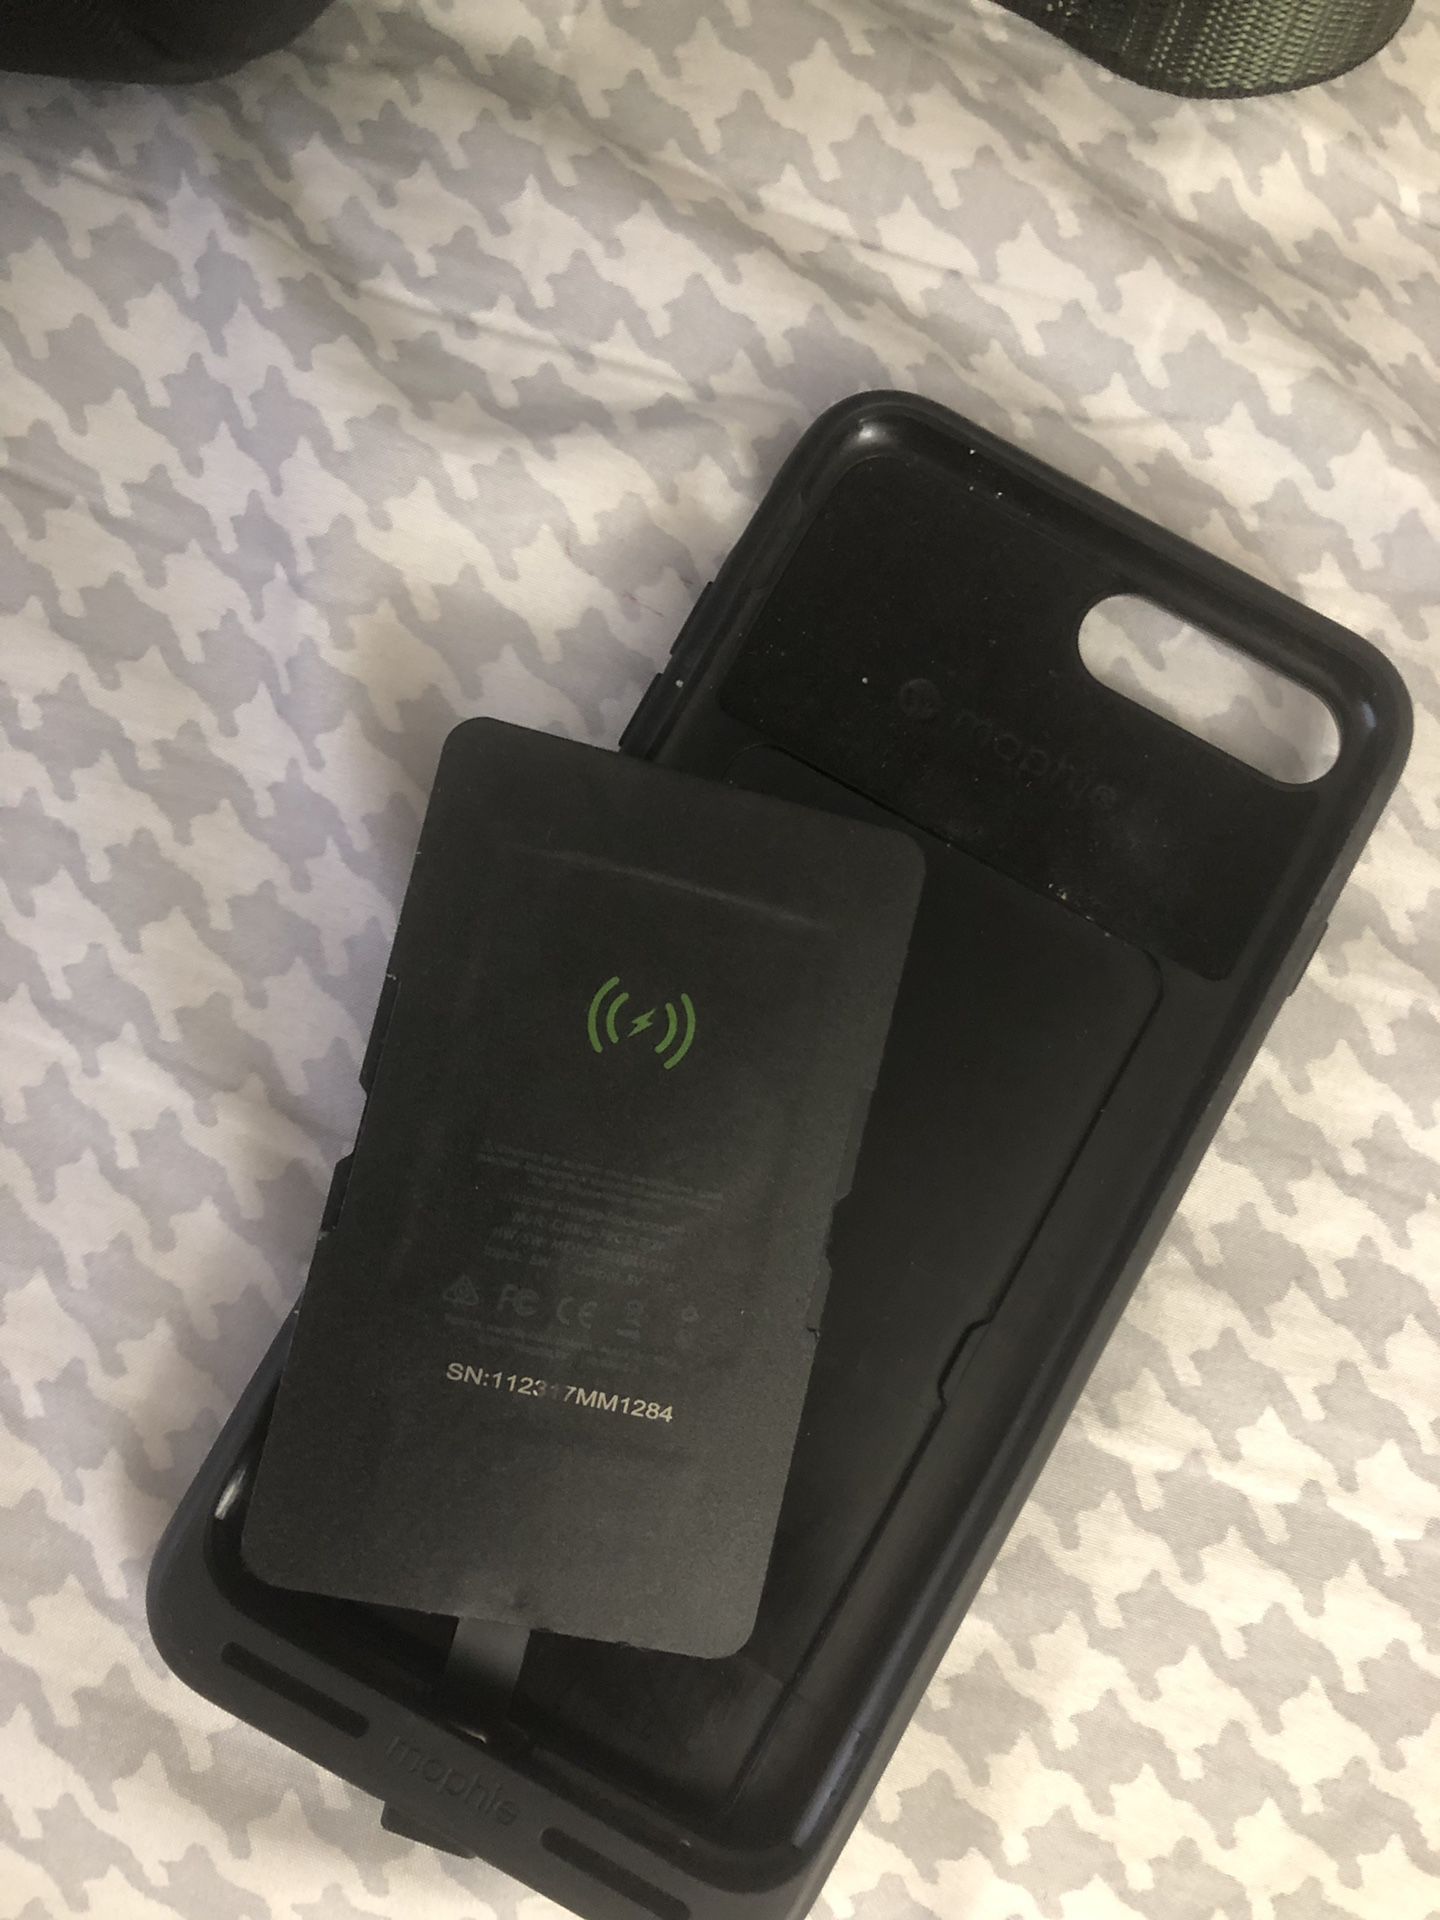 Belkin Heavy Duty Case with Qi Charger for iPhone 6 Plu,7plus